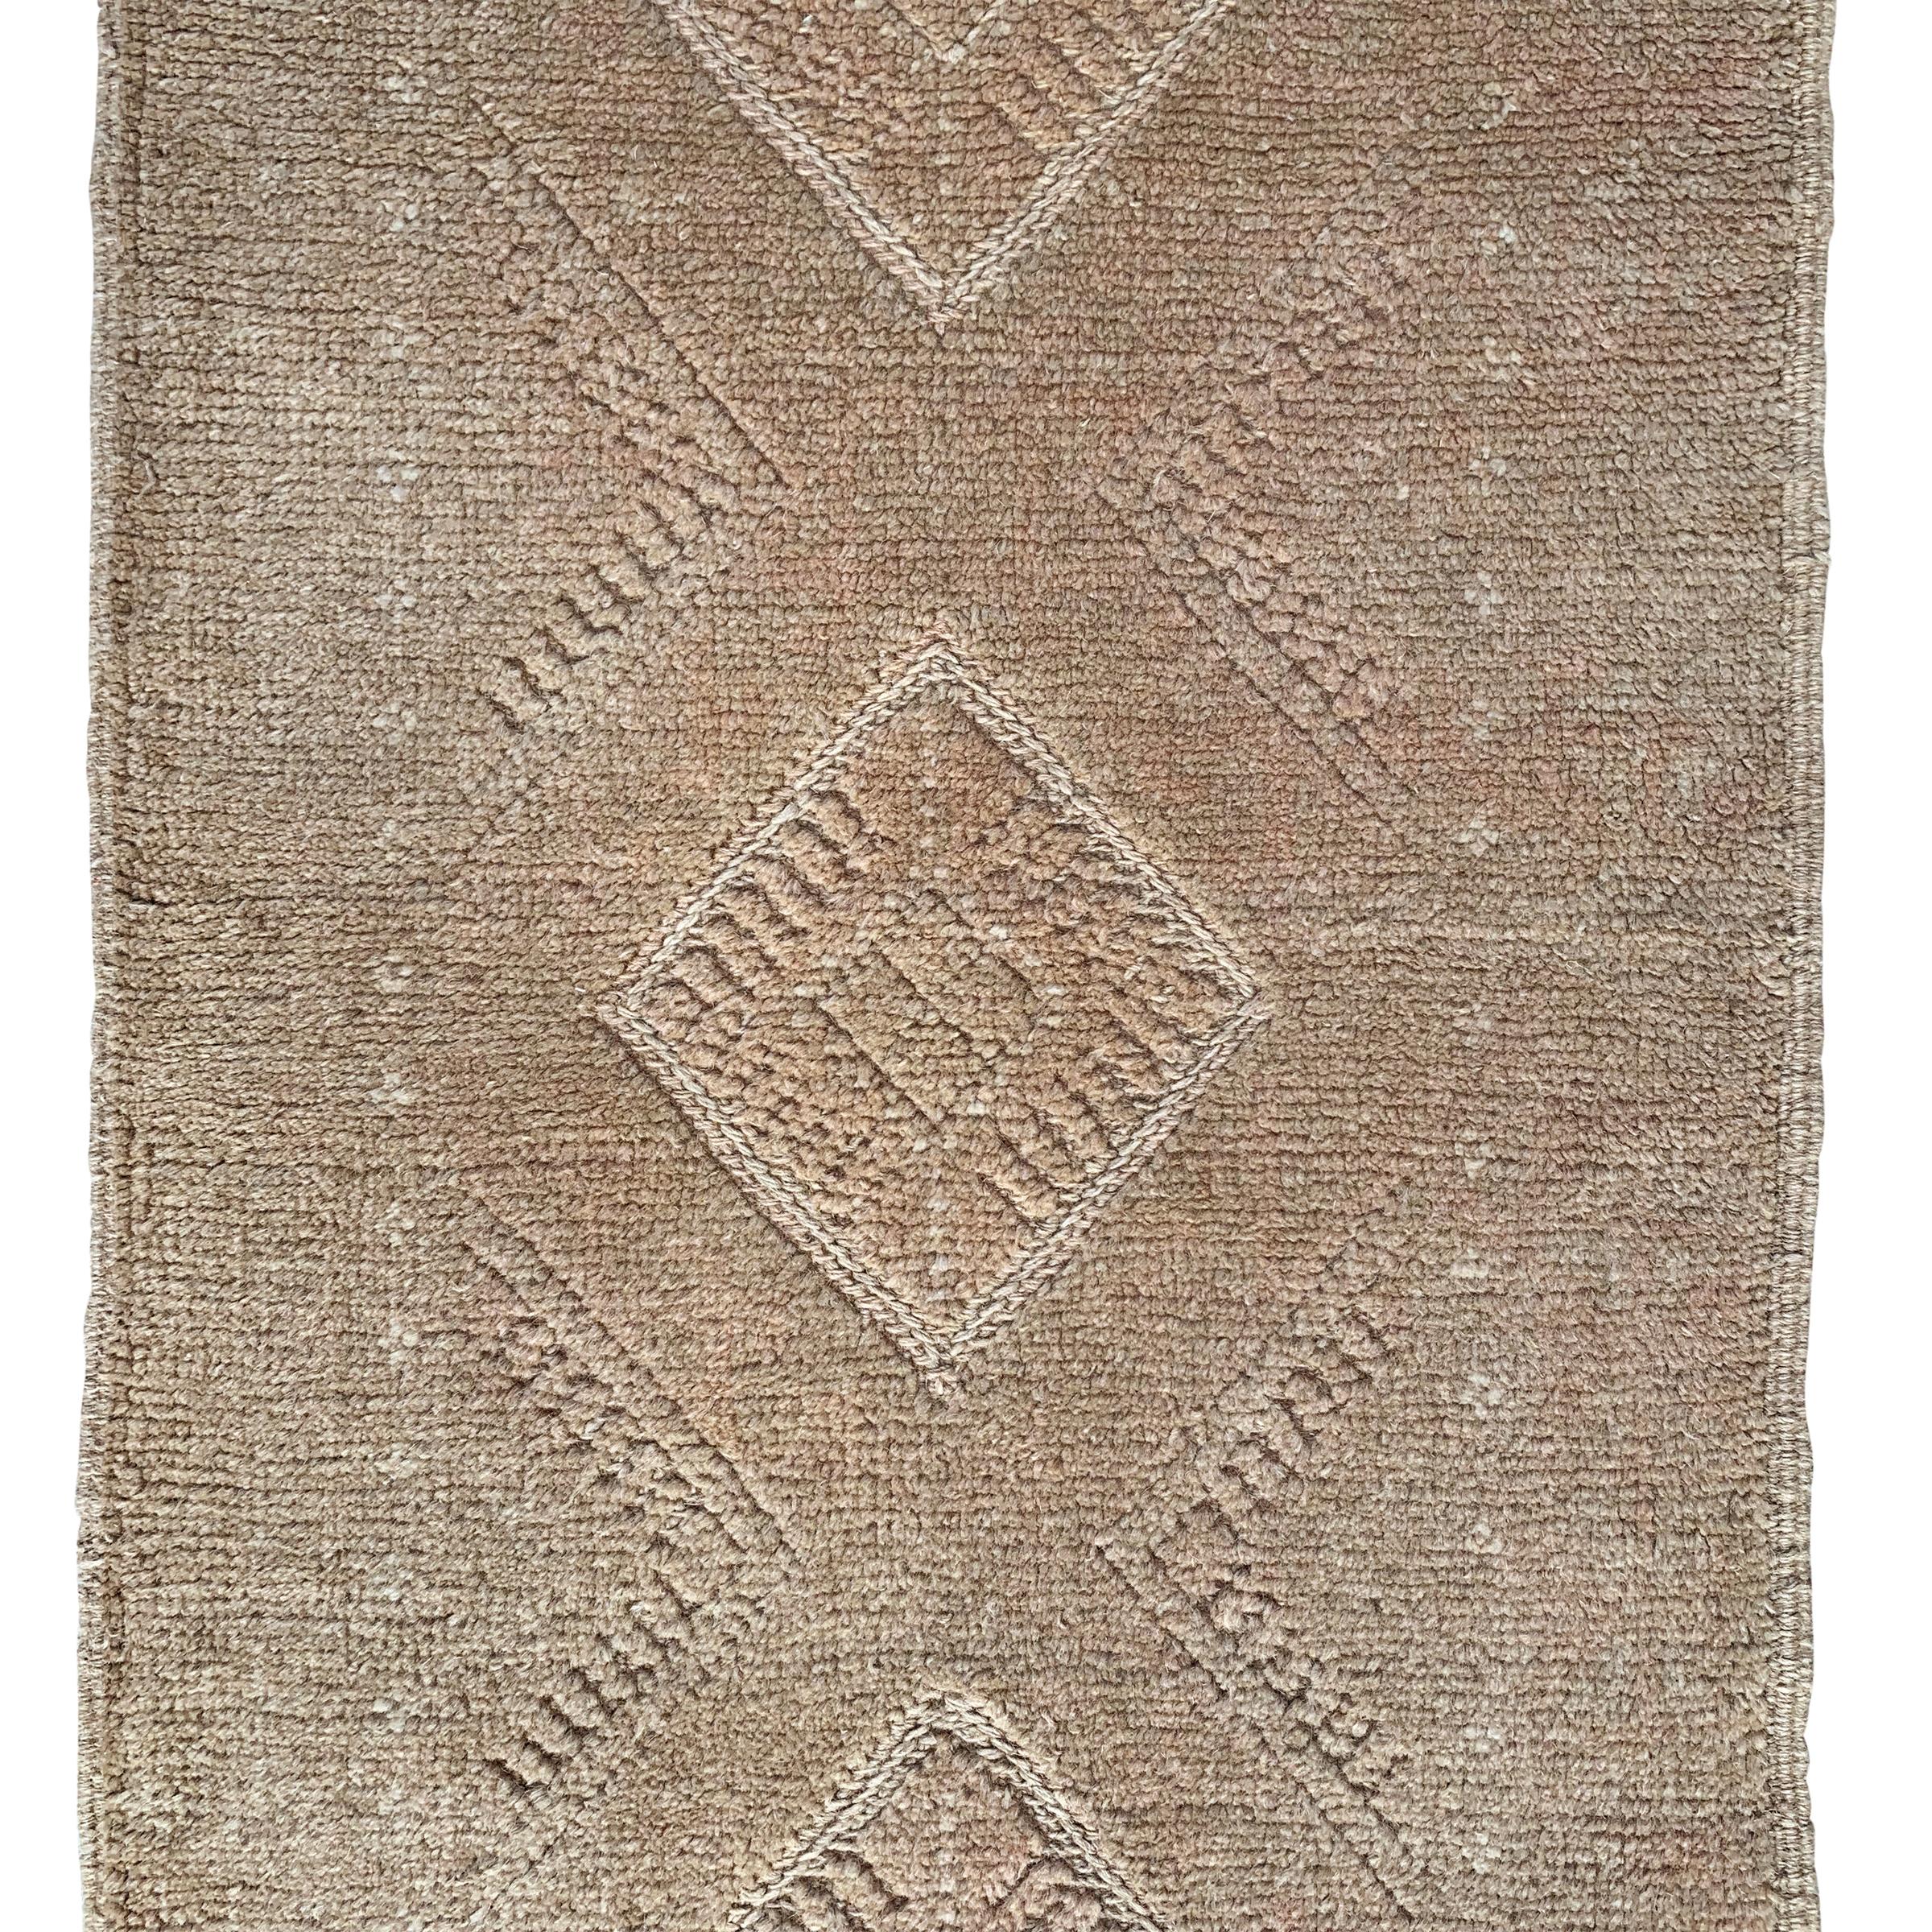 A wonderful 21st century Persian Gabbeh runner with a beautiful tone on tone woven pattern containing multiple diamonds running the length of the rug.